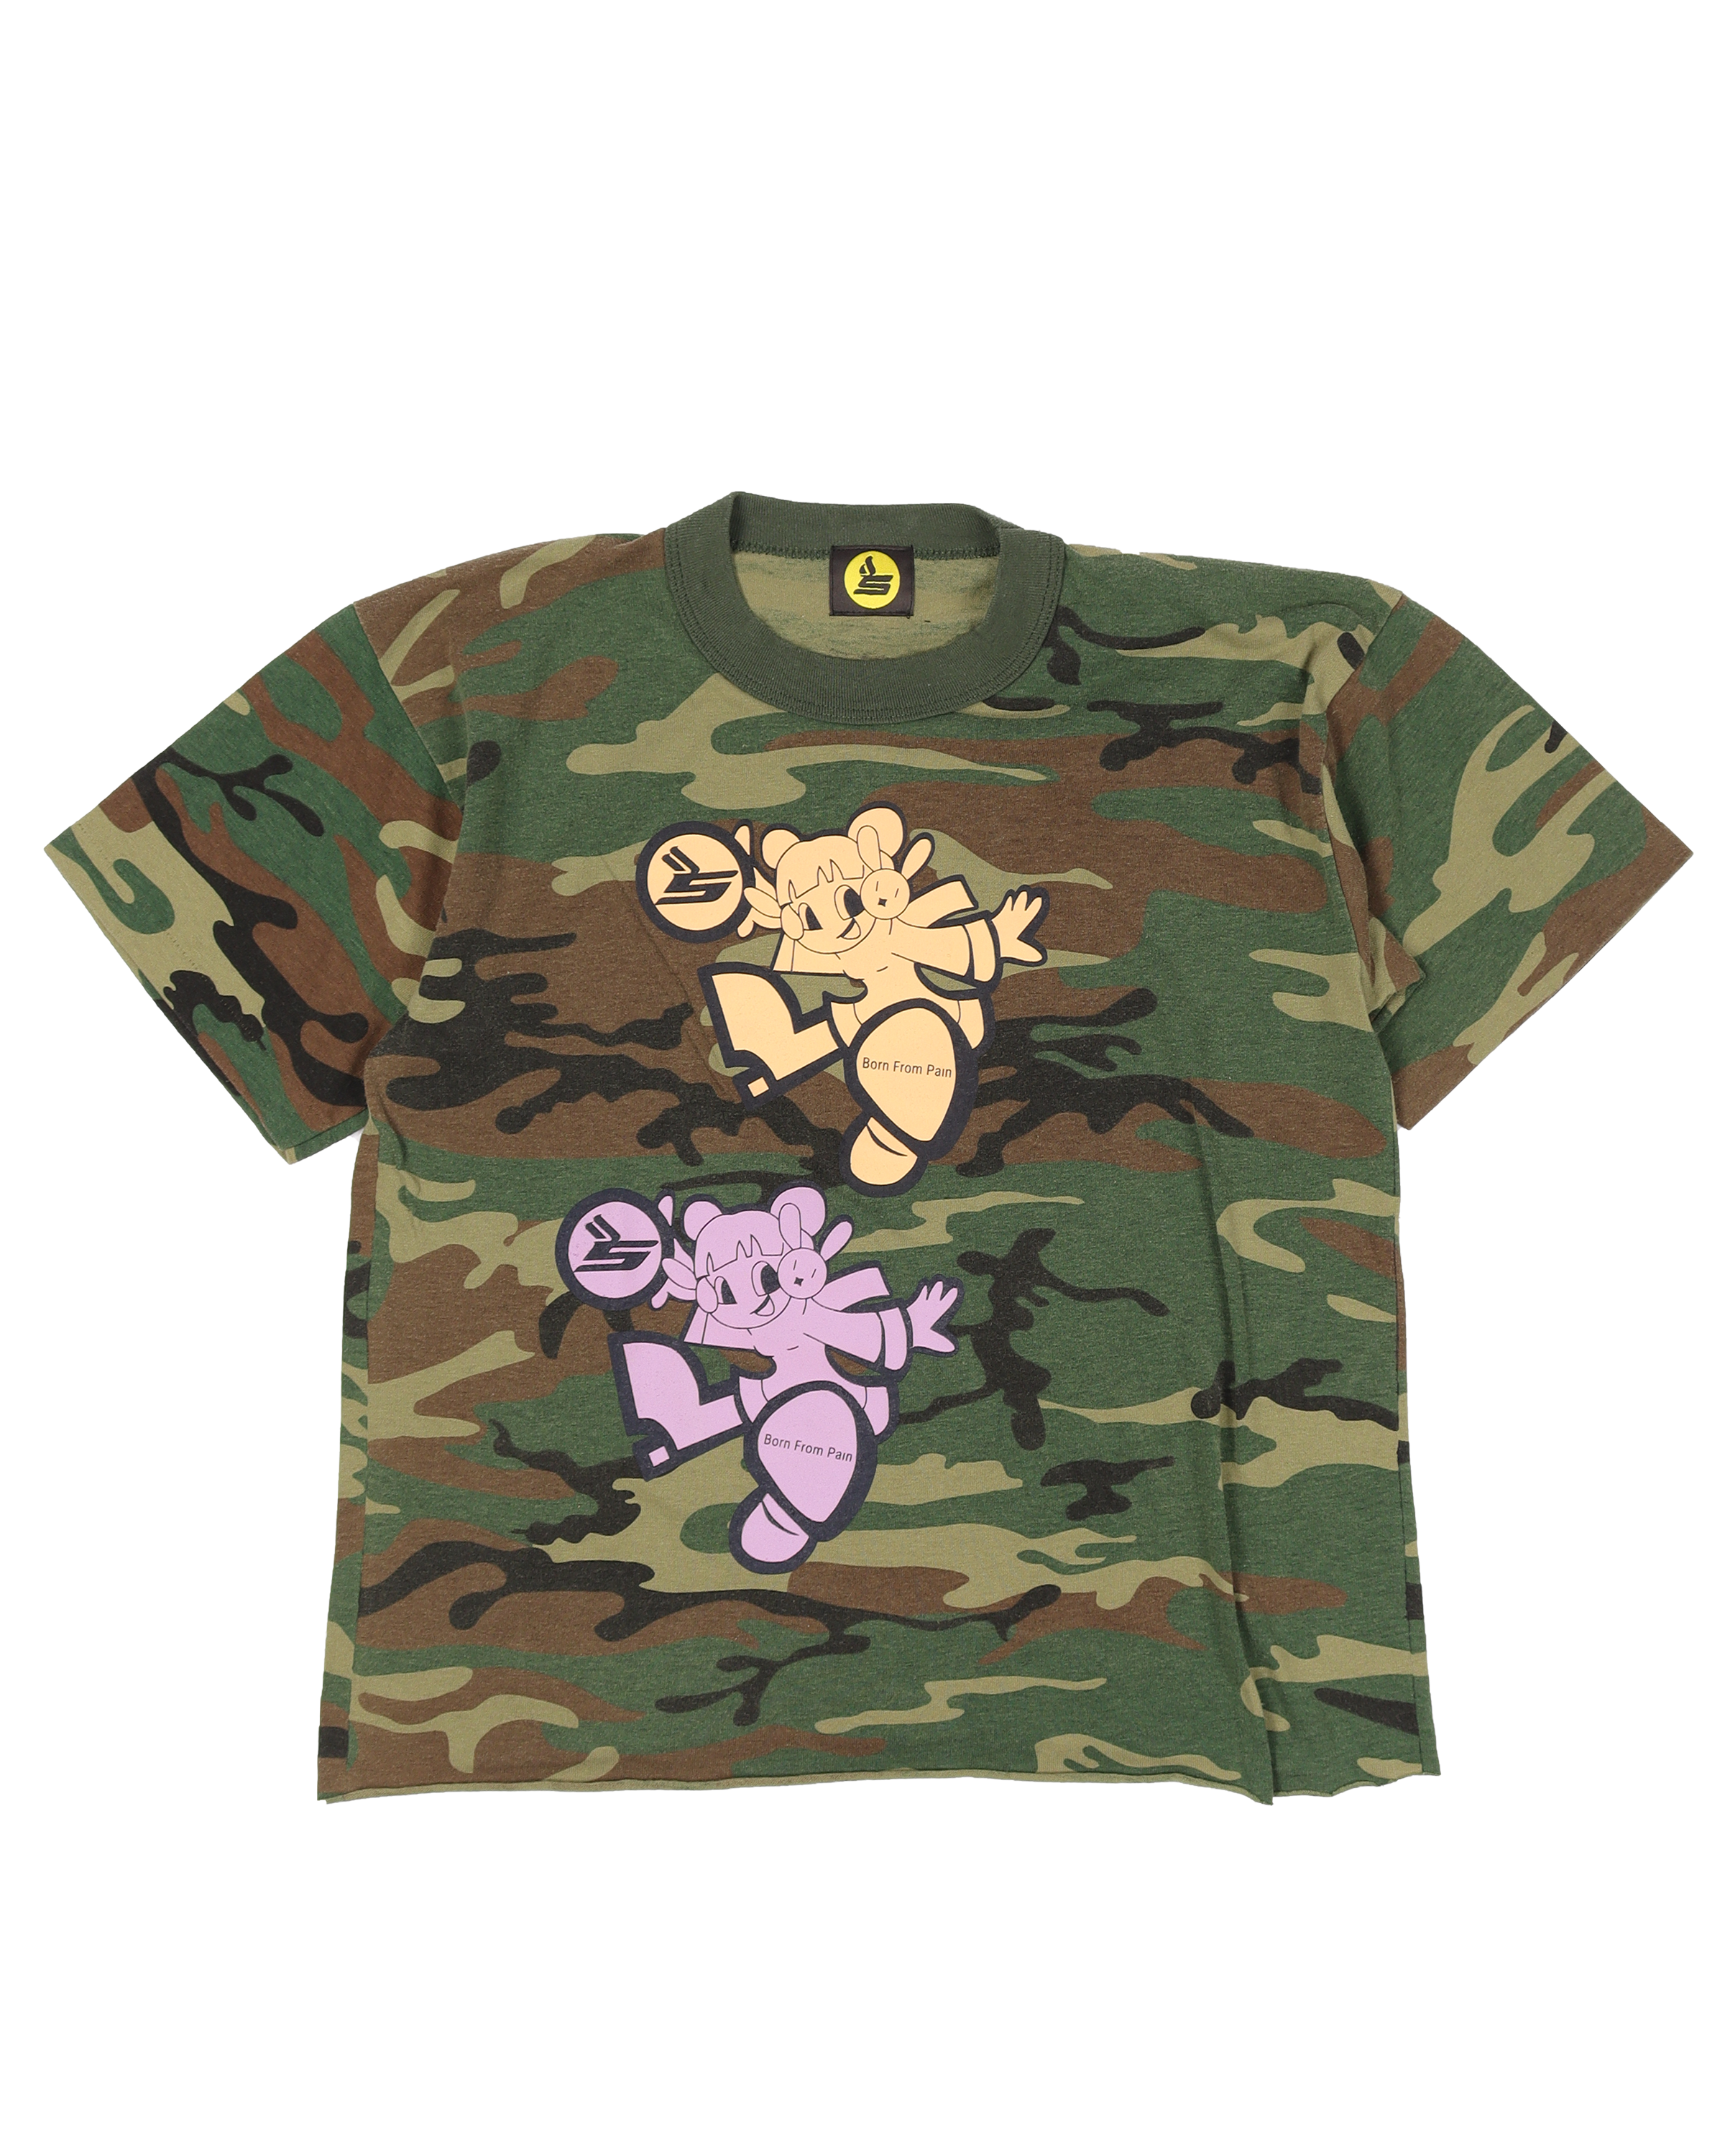 Born From Pain Camouflage T-Shirt